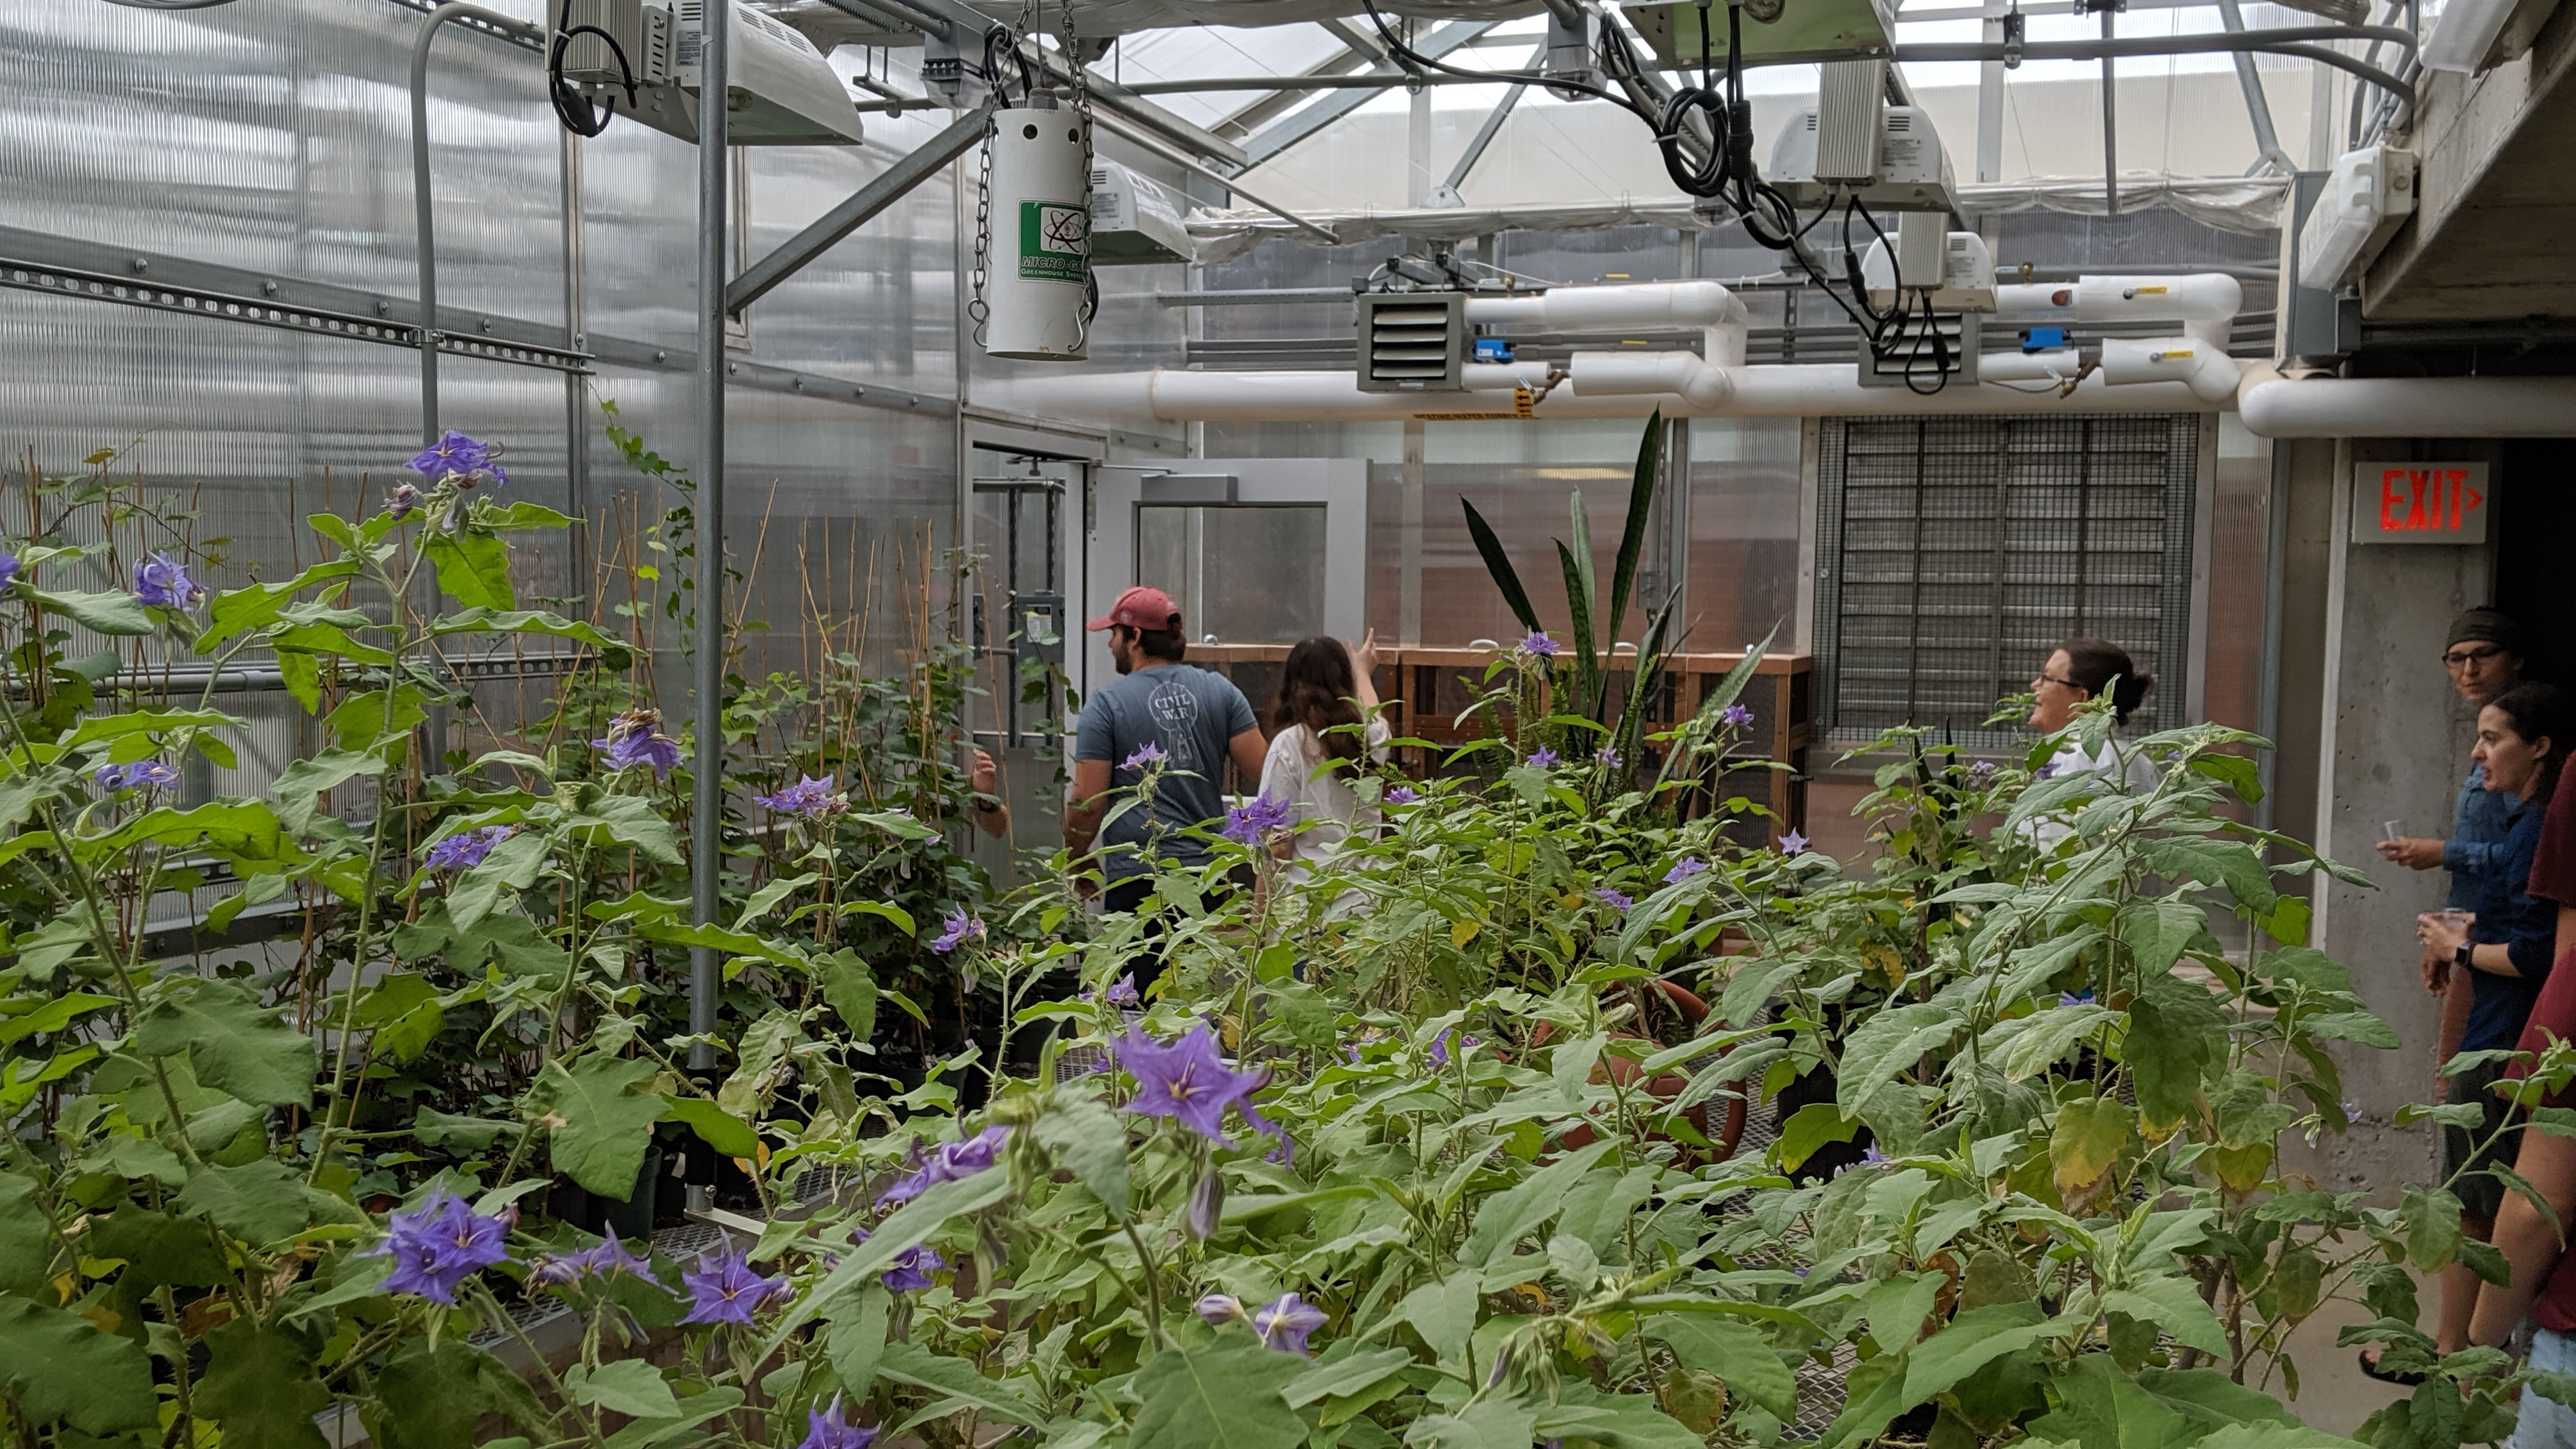 Students in the greenhouse